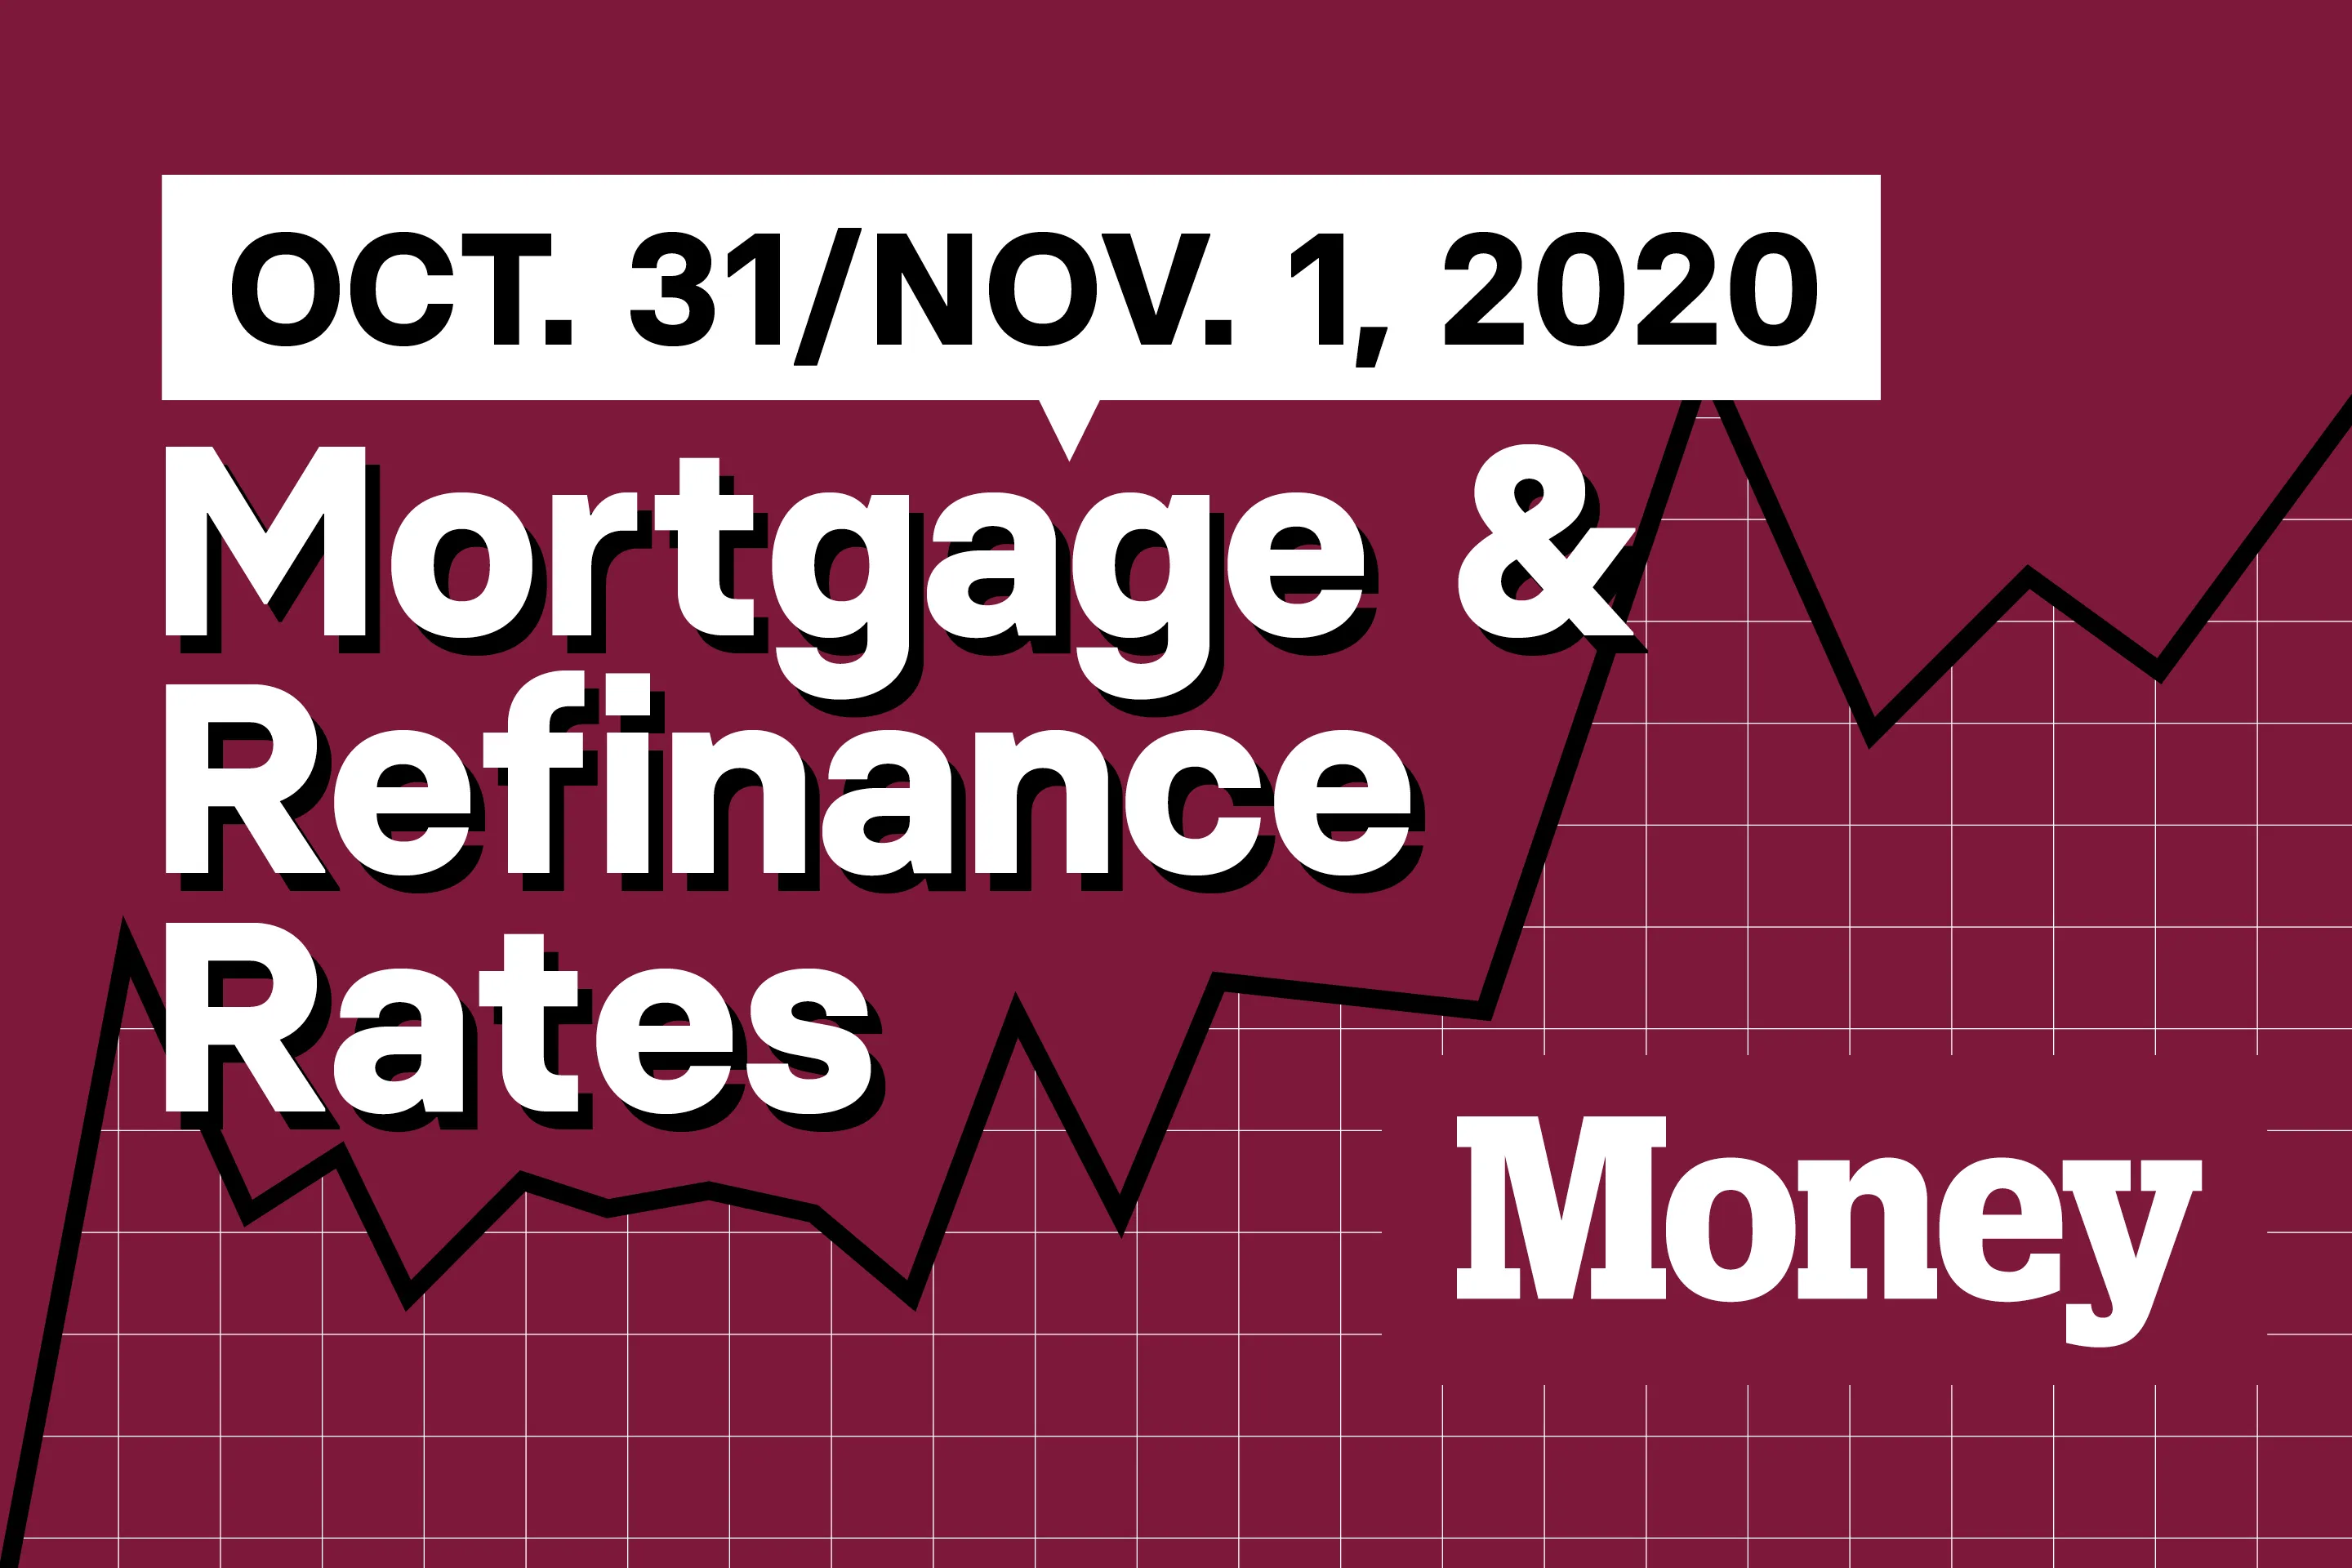 Today's Mortgage and Refinance Rates for October 31 and November 1